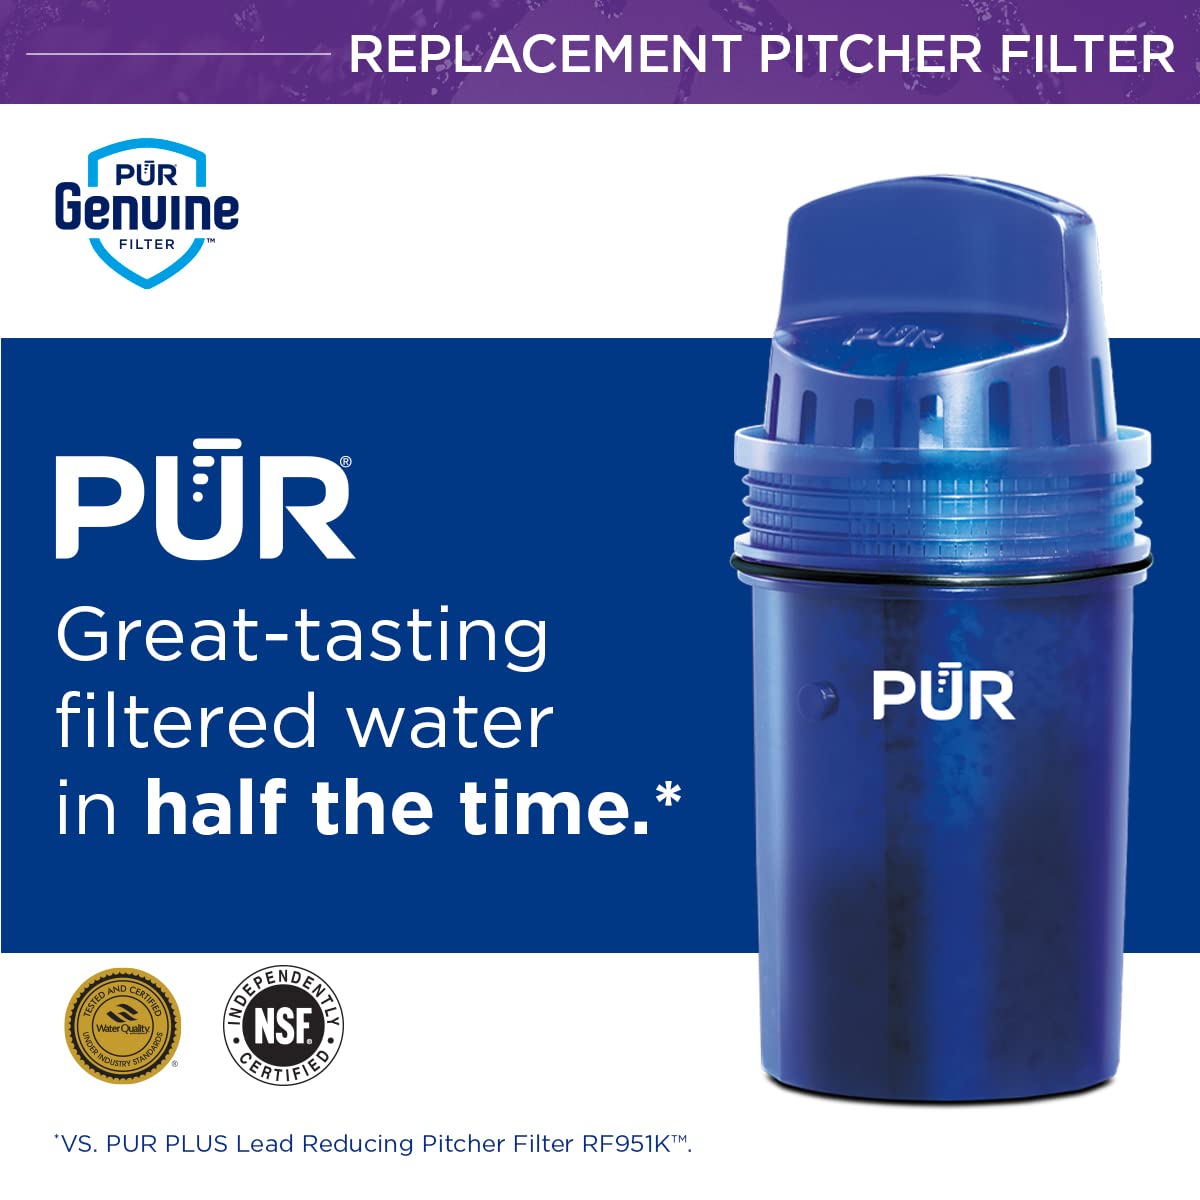 PUR Water Pitcher Replacement Filter (Pack of 4), Blue – Compatible with all PUR Pitcher and Dispenser Filtration Systems, PPF900Z